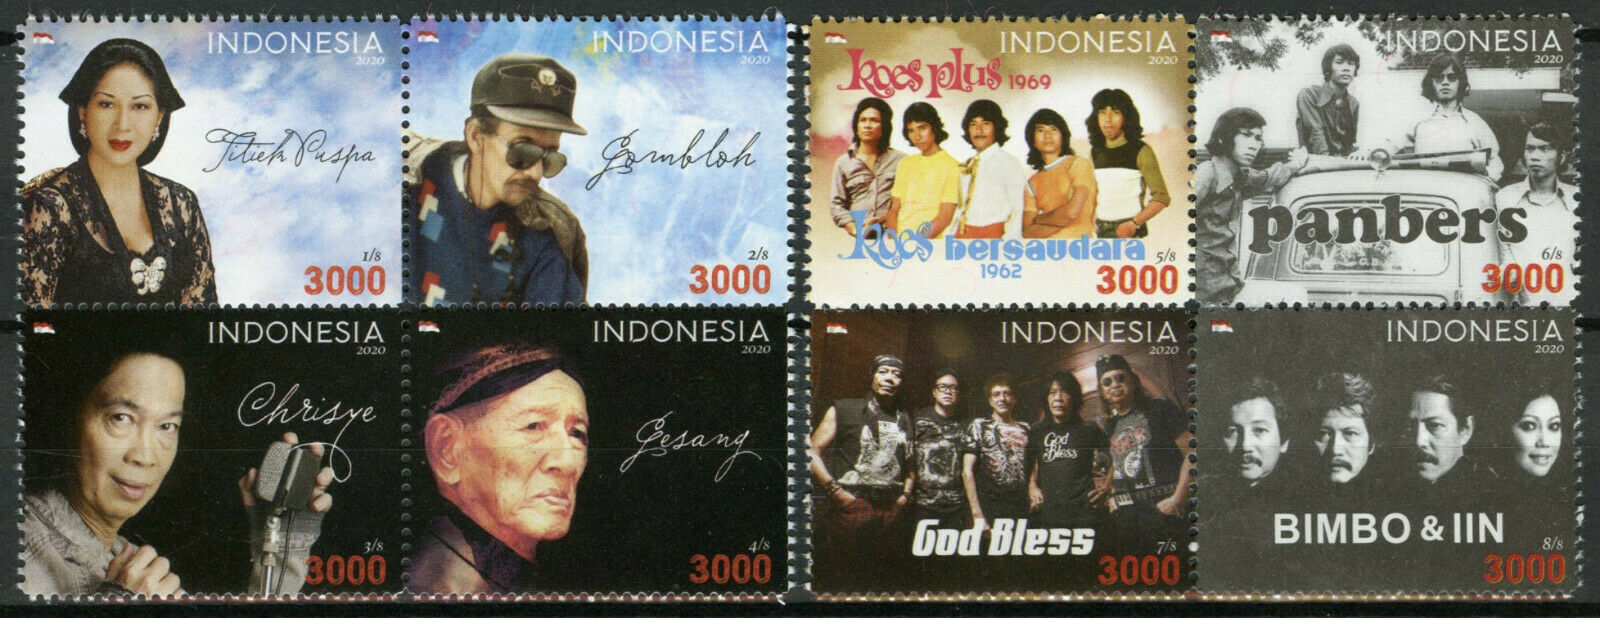 Indonesia Music Stamps 2020 MNH Singers Musicians Panbers Koes Plus 2x 4v Block